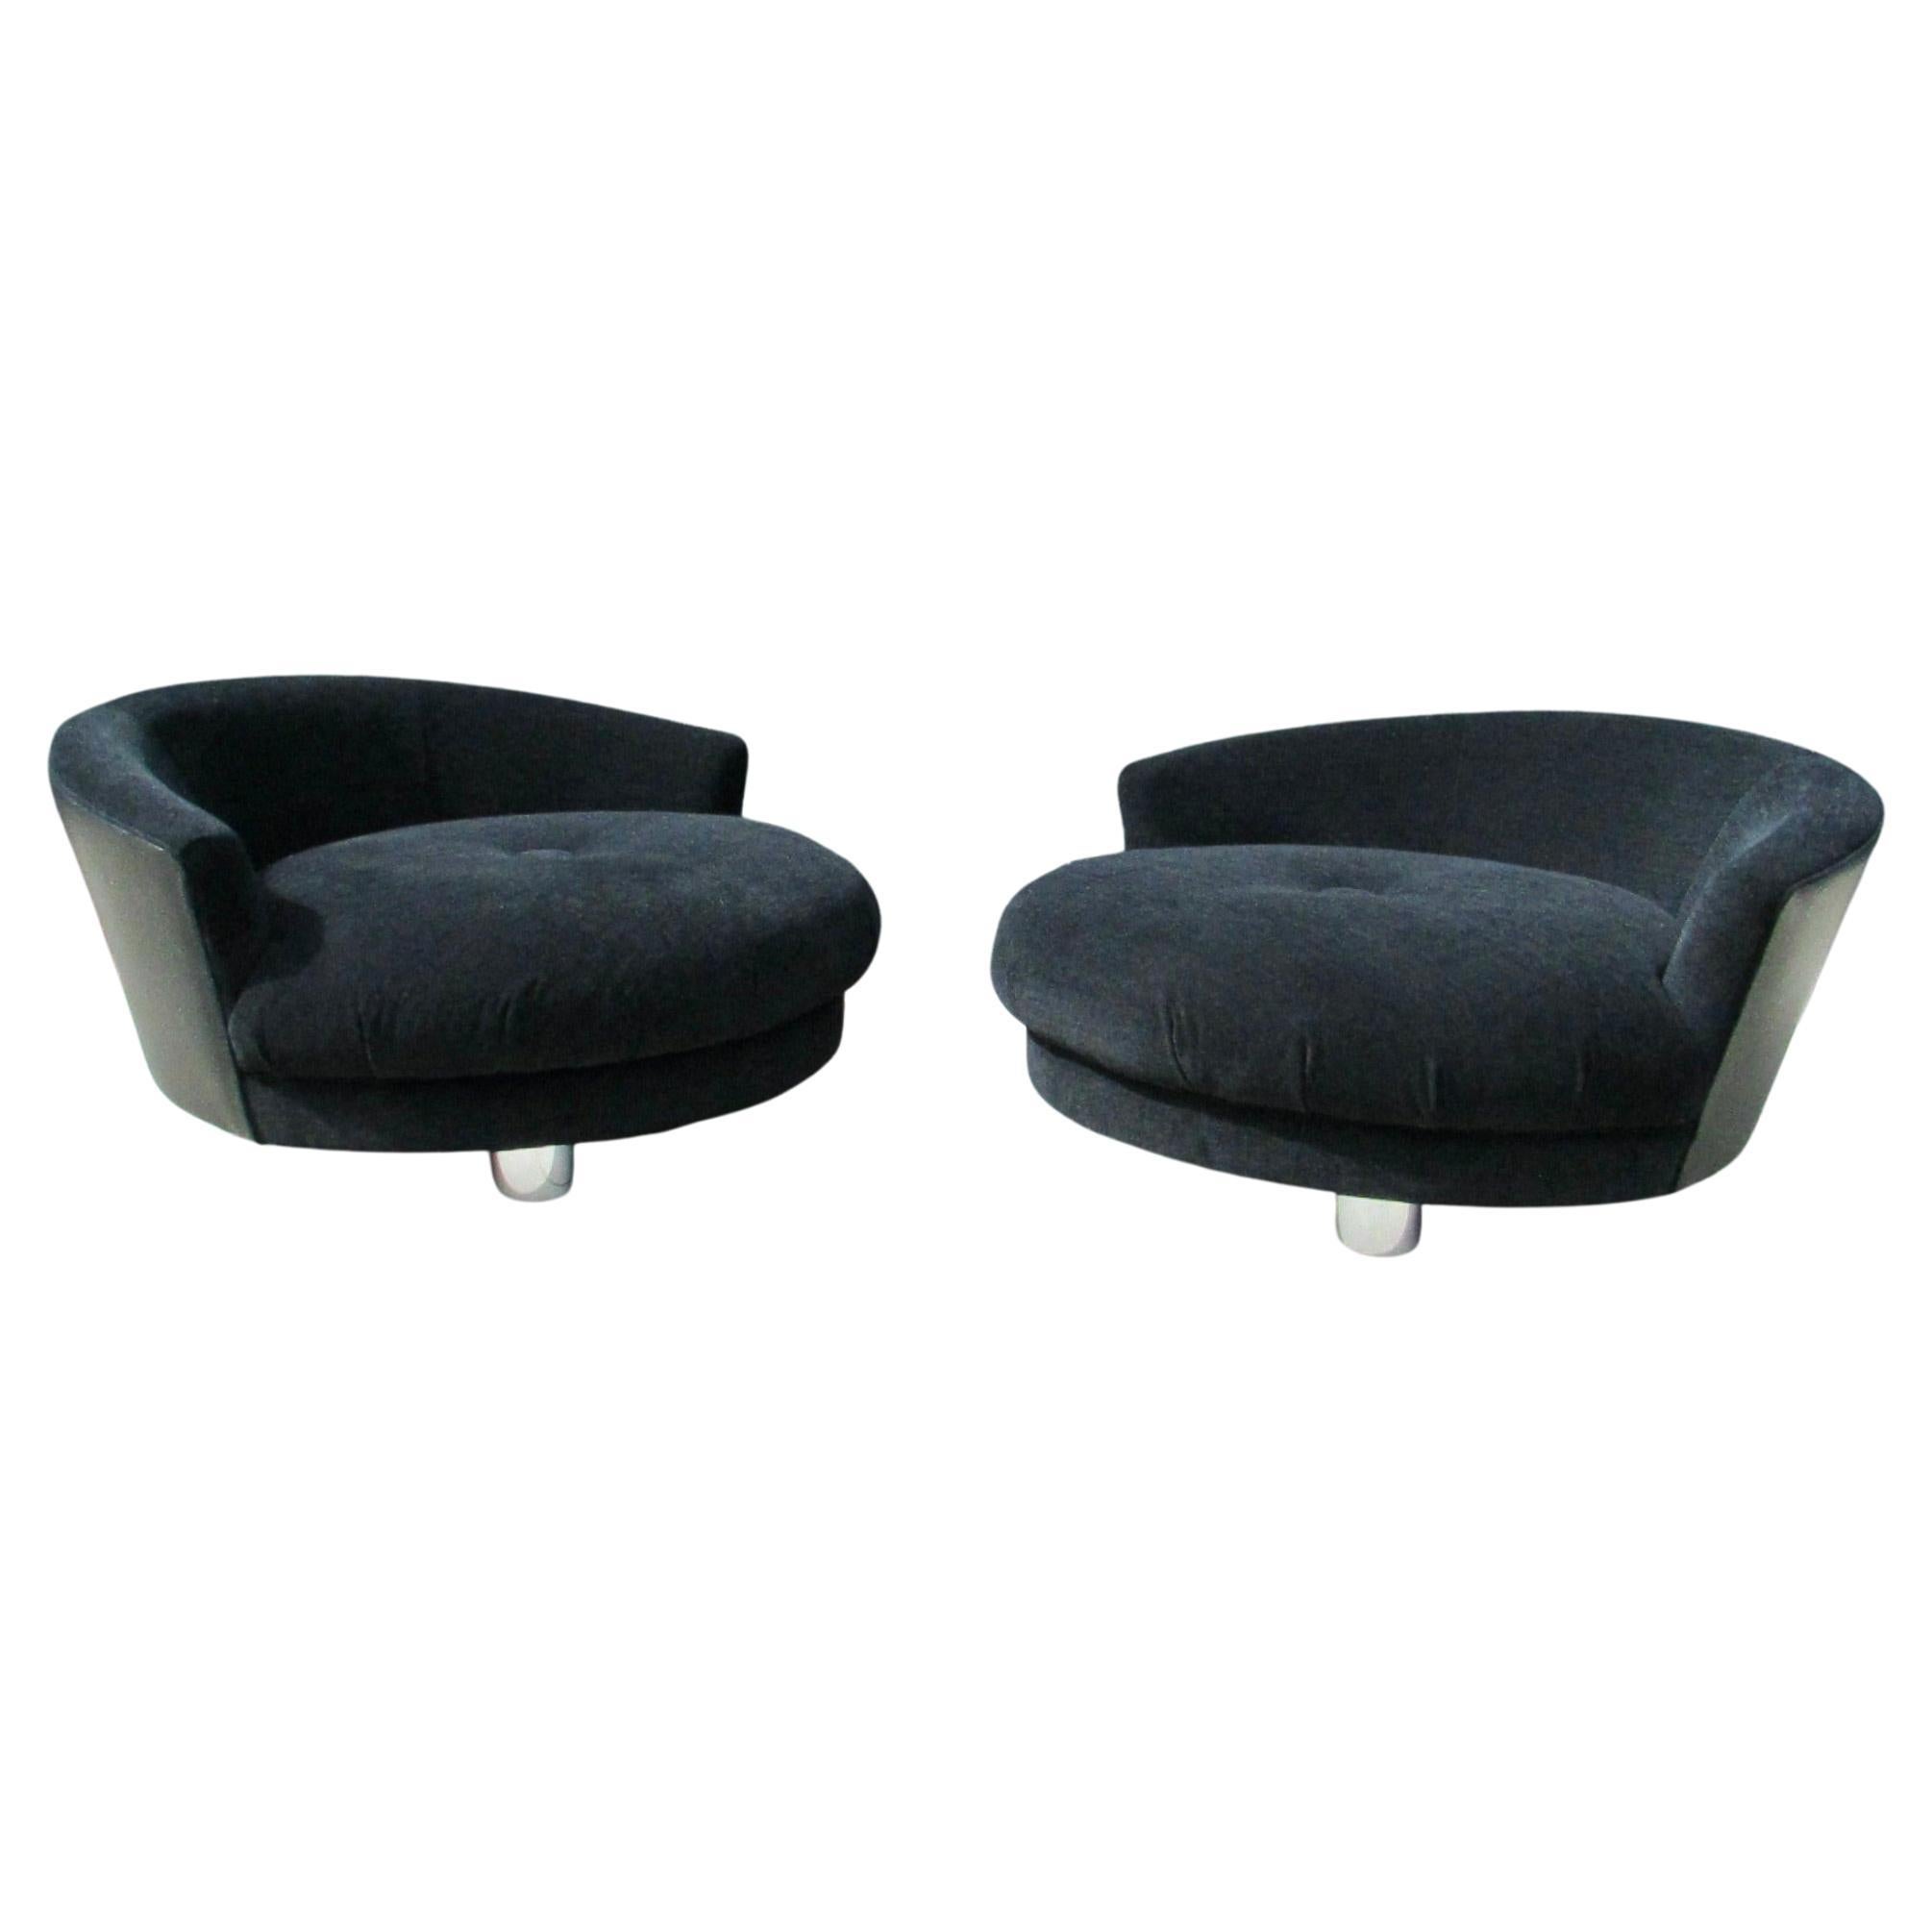 Pair of Large and Inviting Round Milo Baughman Lounge Chairs